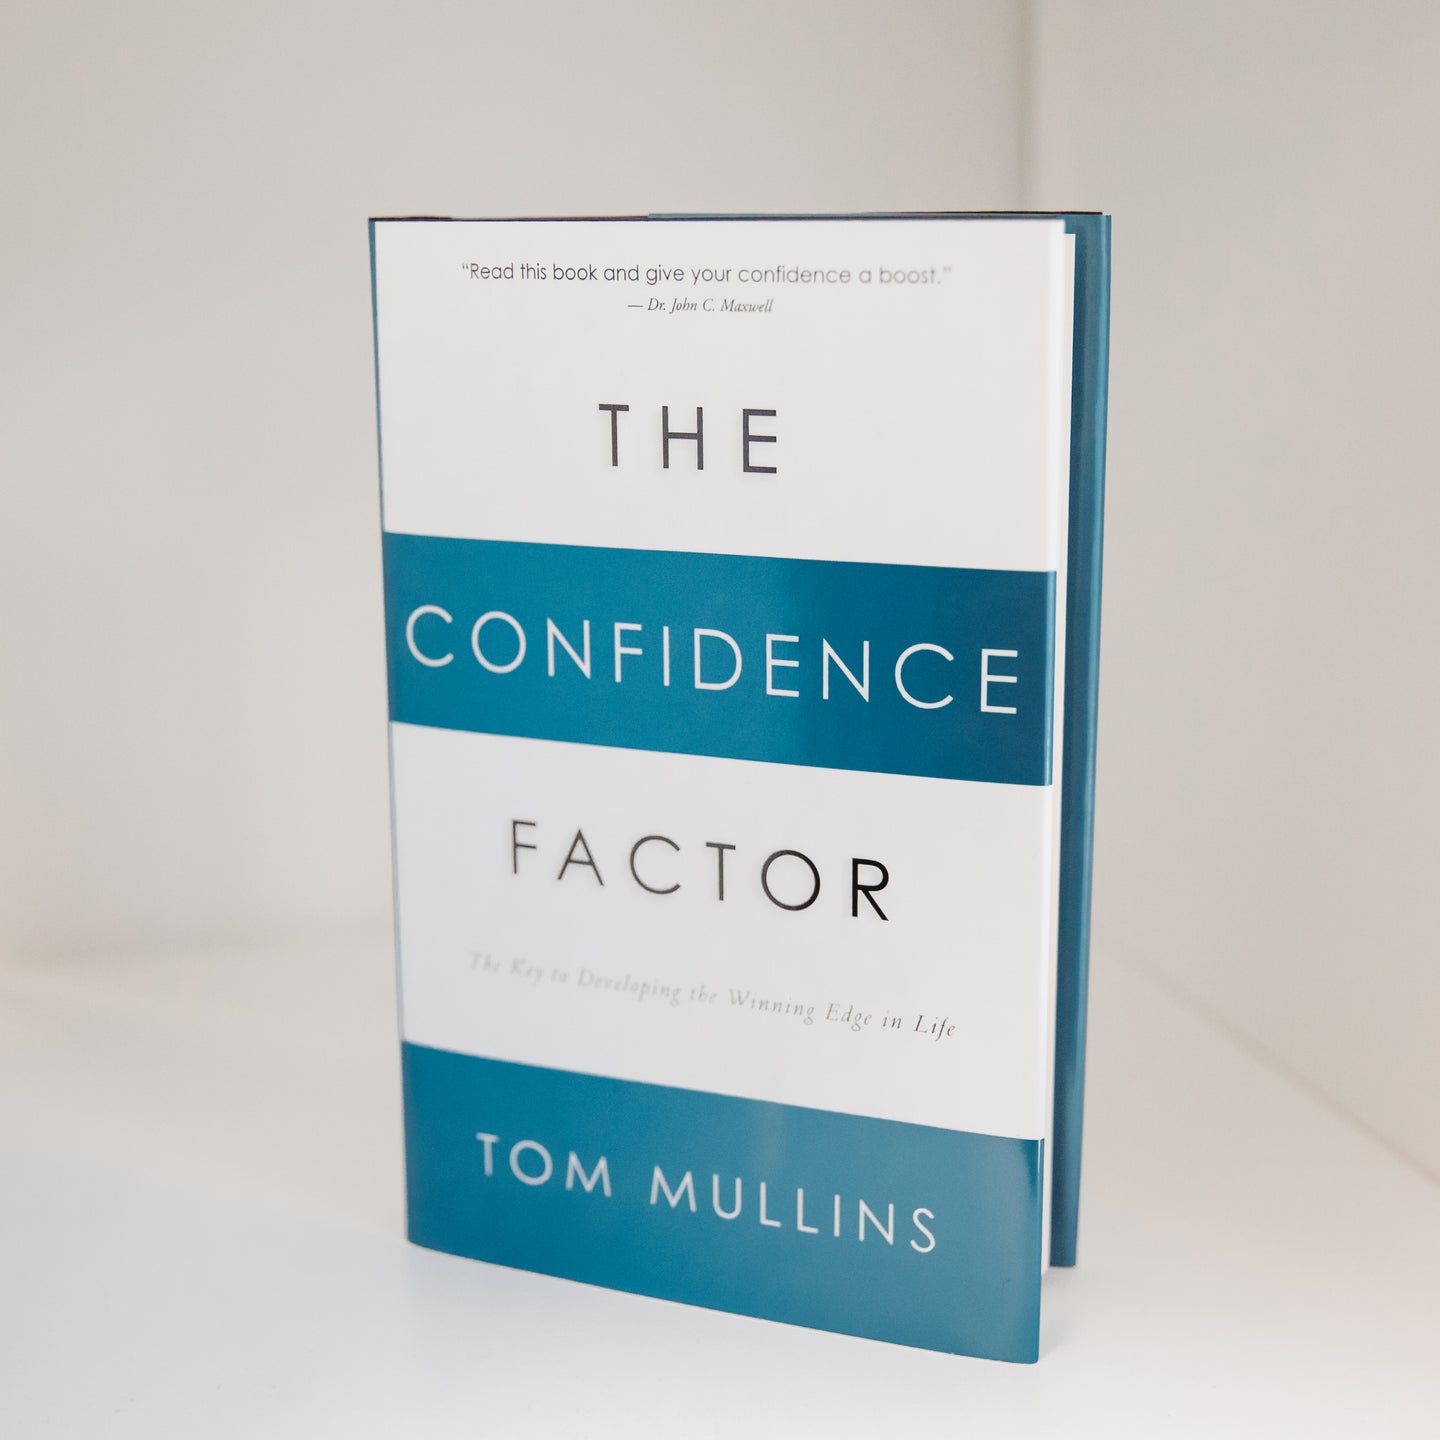 The Confidence Factor by Dr. Tom Mullins